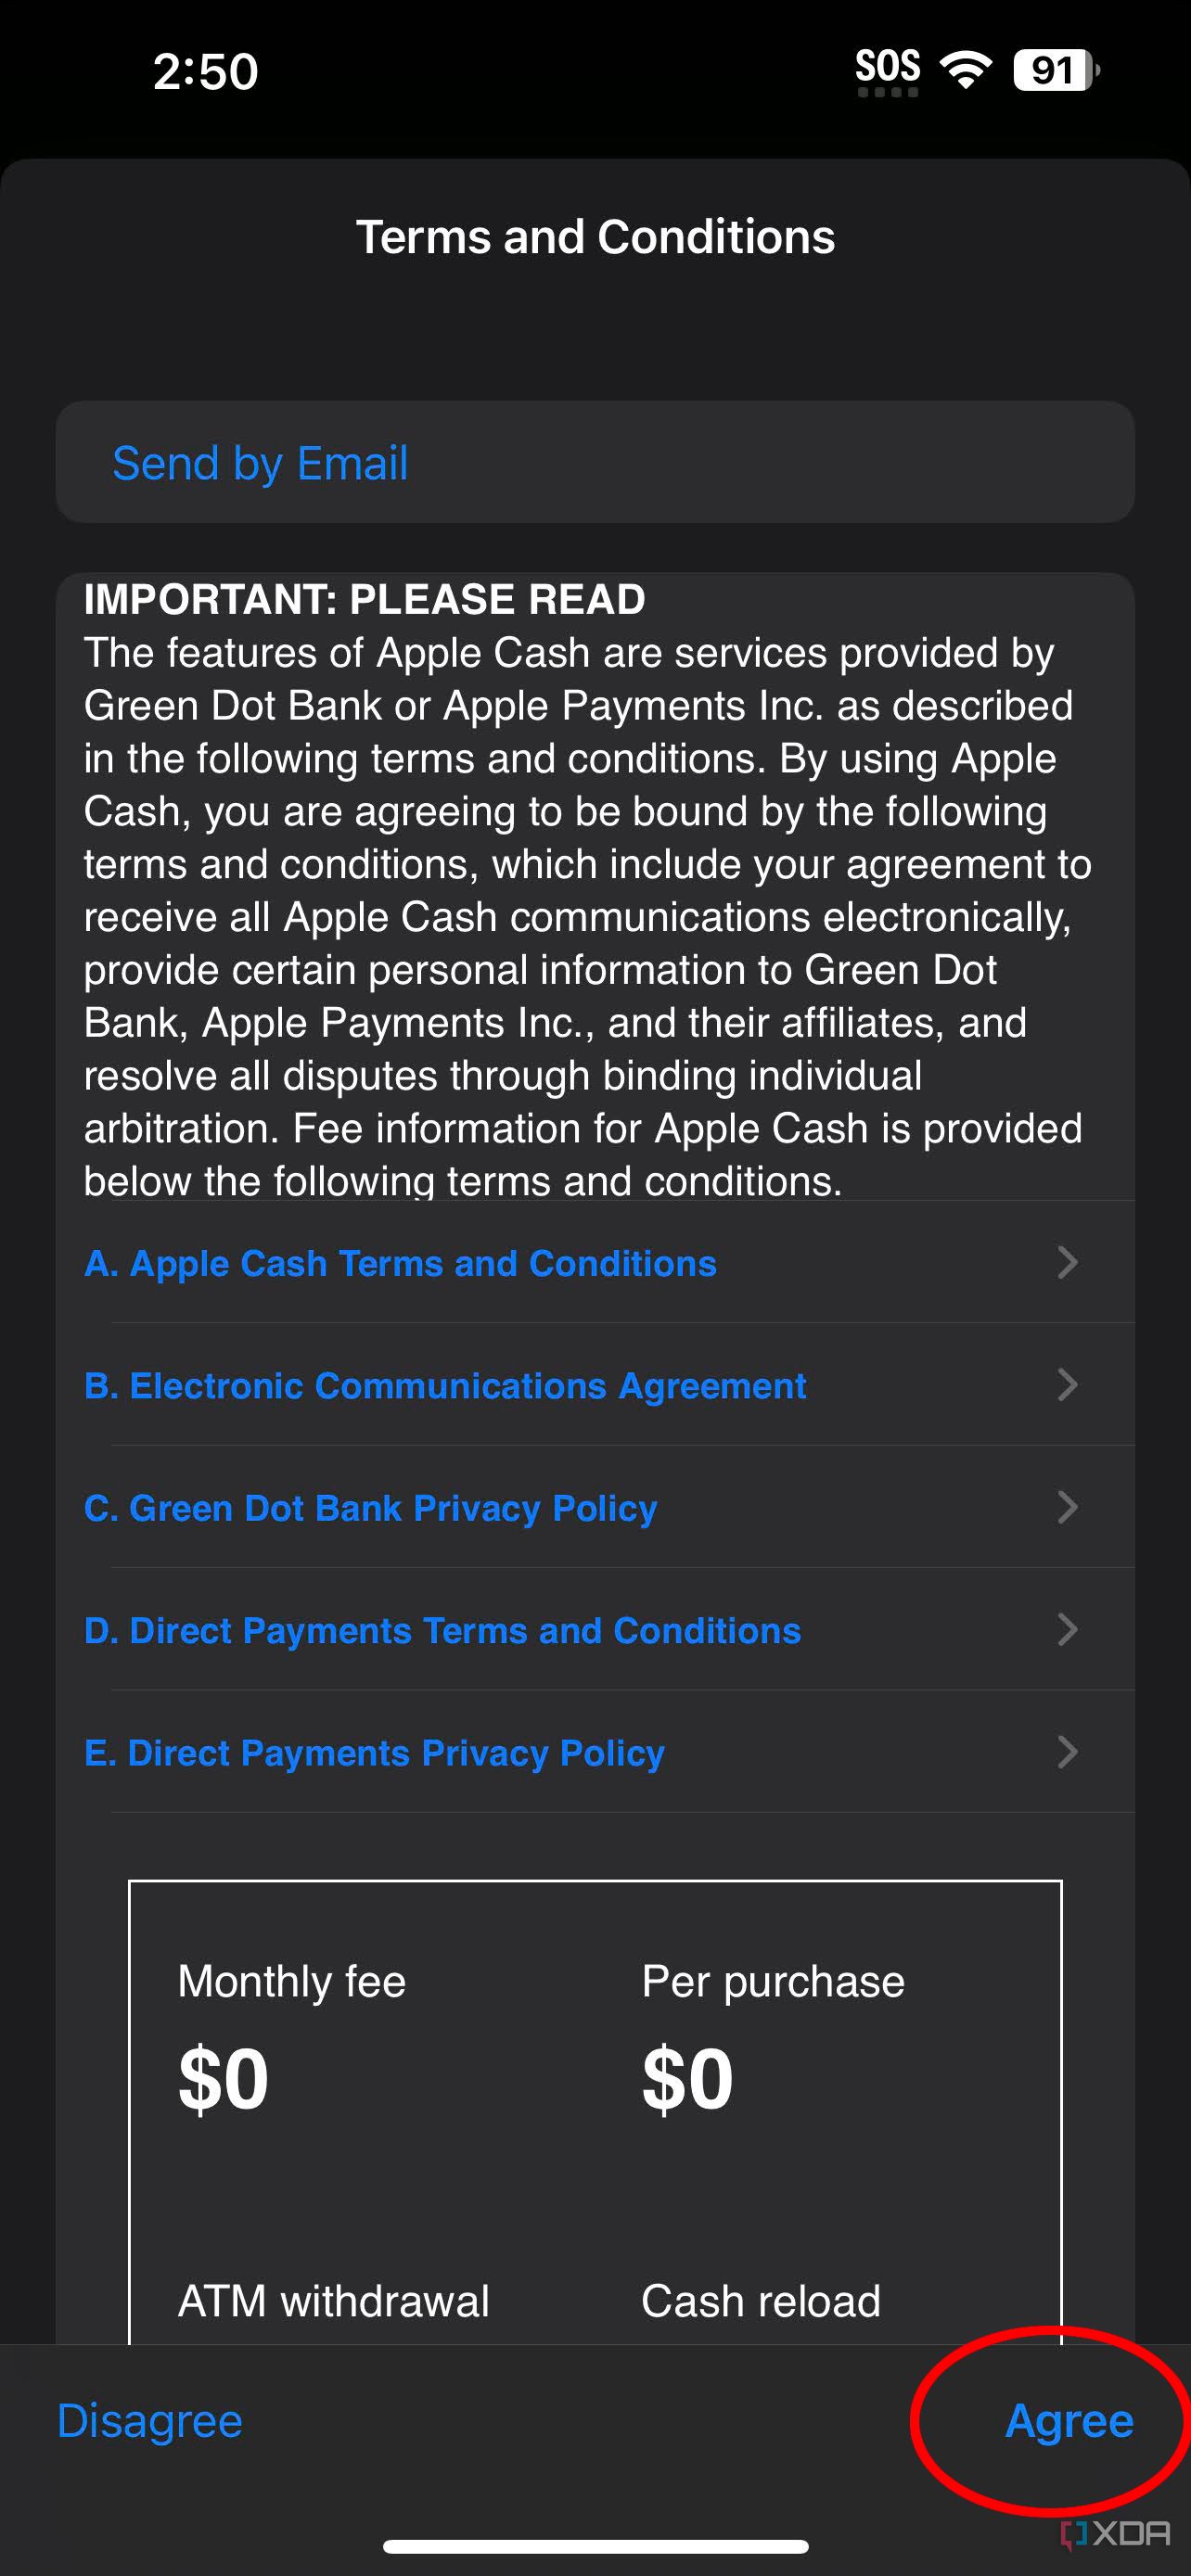 The terms and condition page for Apple Cash.